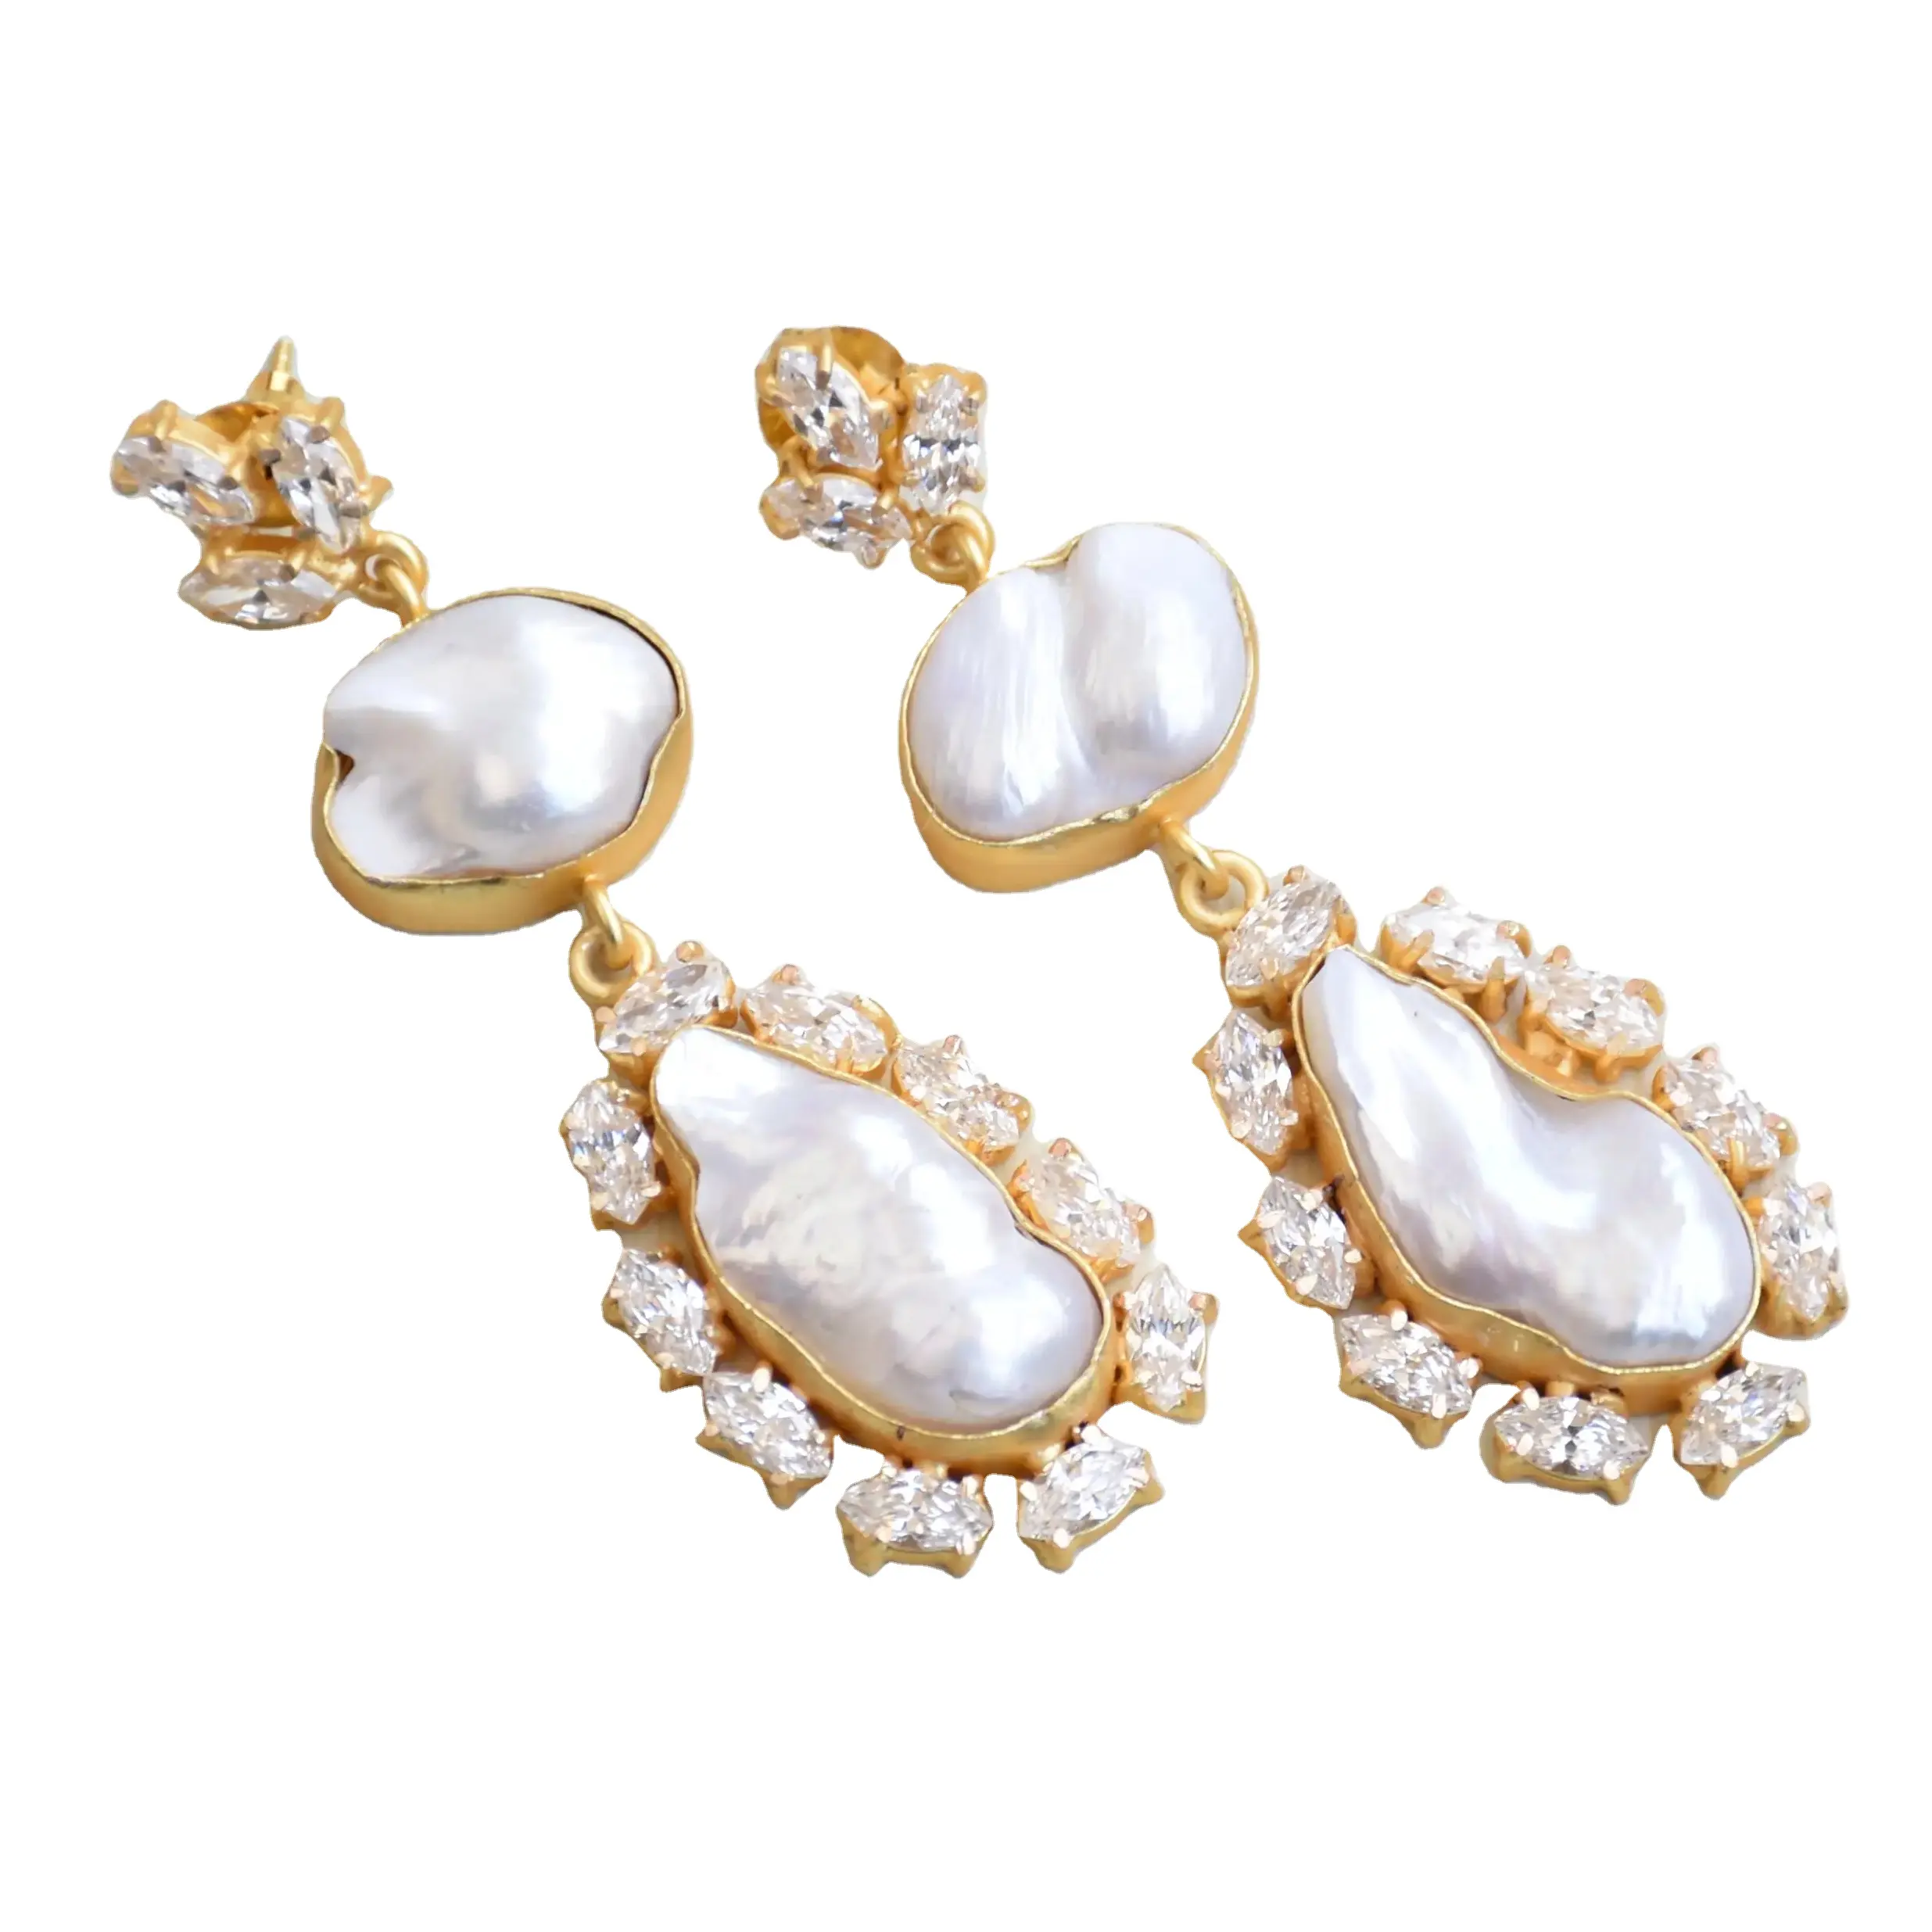 Long Drop Pearl Earrings Fashion Gold Plated Zircon Earrings with Freshwater Pearl New Hot Handcrafted Jewellery Wholesalers